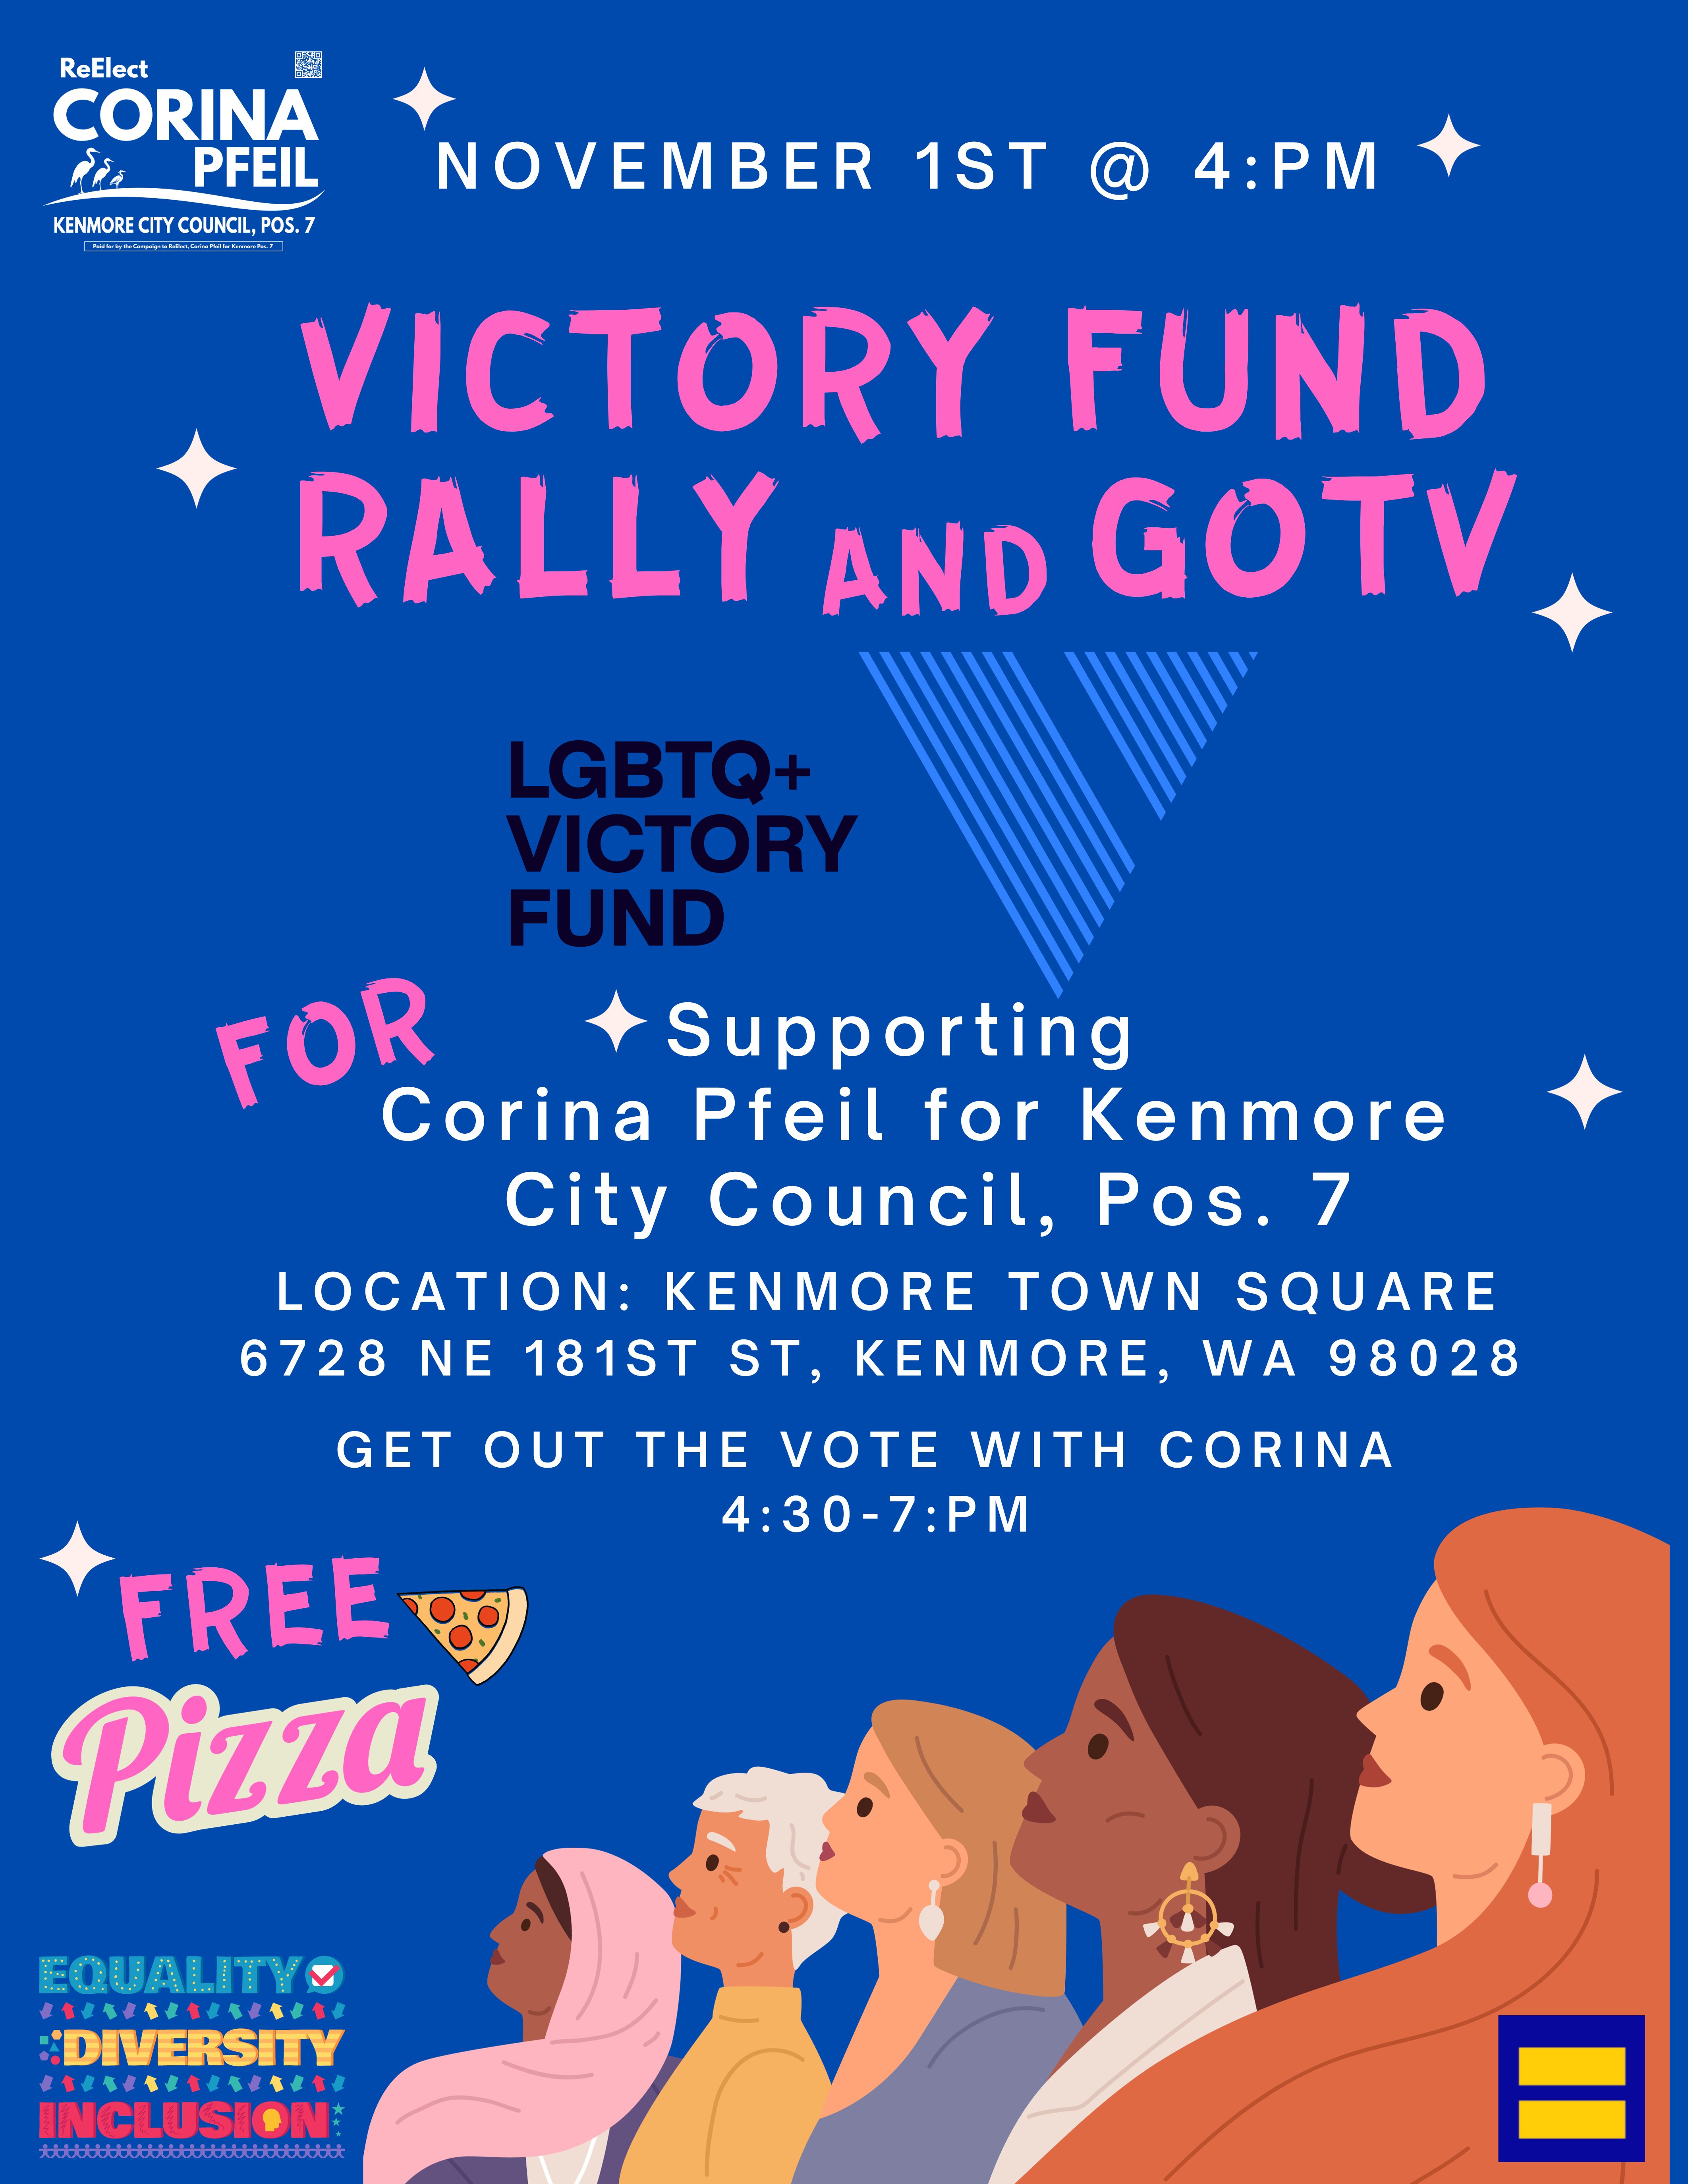 Rally and GOTV with LGBTQ+ Victory Fund,, For.  Supporting Corina Pfeil for Kenmore City Council , Position 7. Location: Kenmore Town Square, 6728 NE 181st, Kenmore, WA 98028.  Get out the Vote with Corina  following rally at 4:30pm - 7:pm.   Free Pizza.  Equality, Diversity, Inclusion. Mirrage Equality